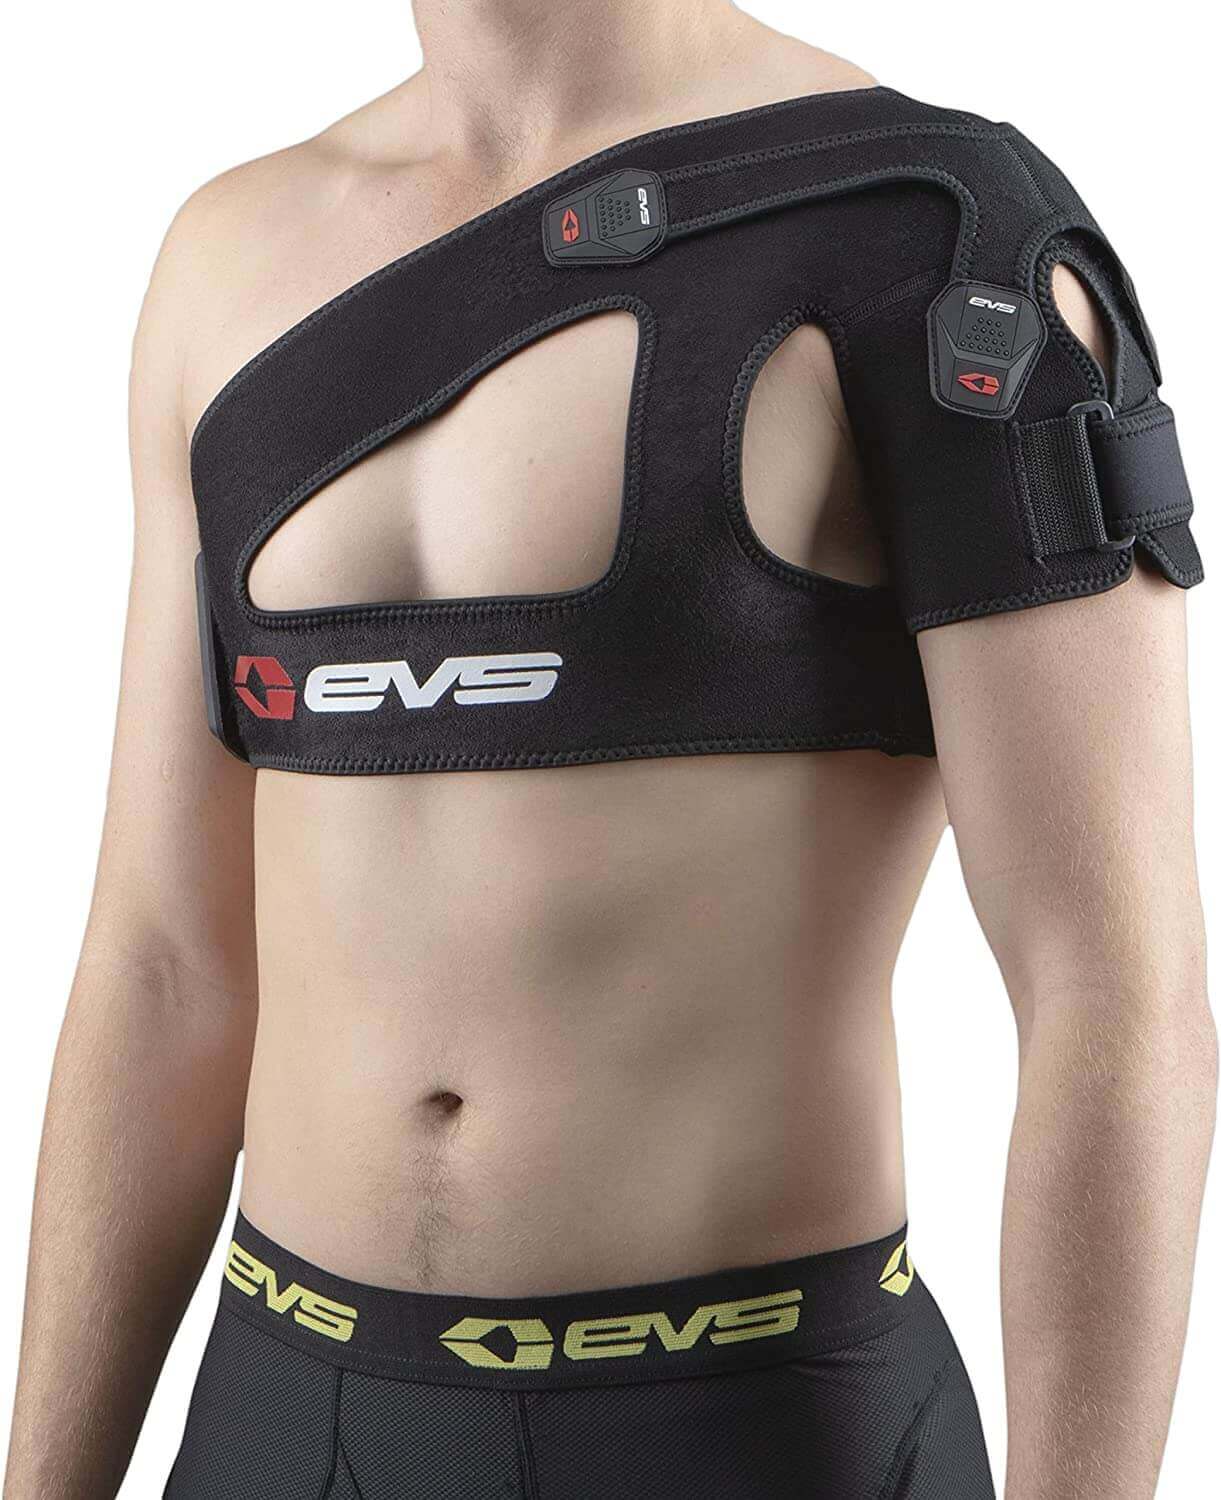 Top-rated EVS Shoulder Brace with adjustable straps and lightweight design, offering optimal support and comfort in 2023